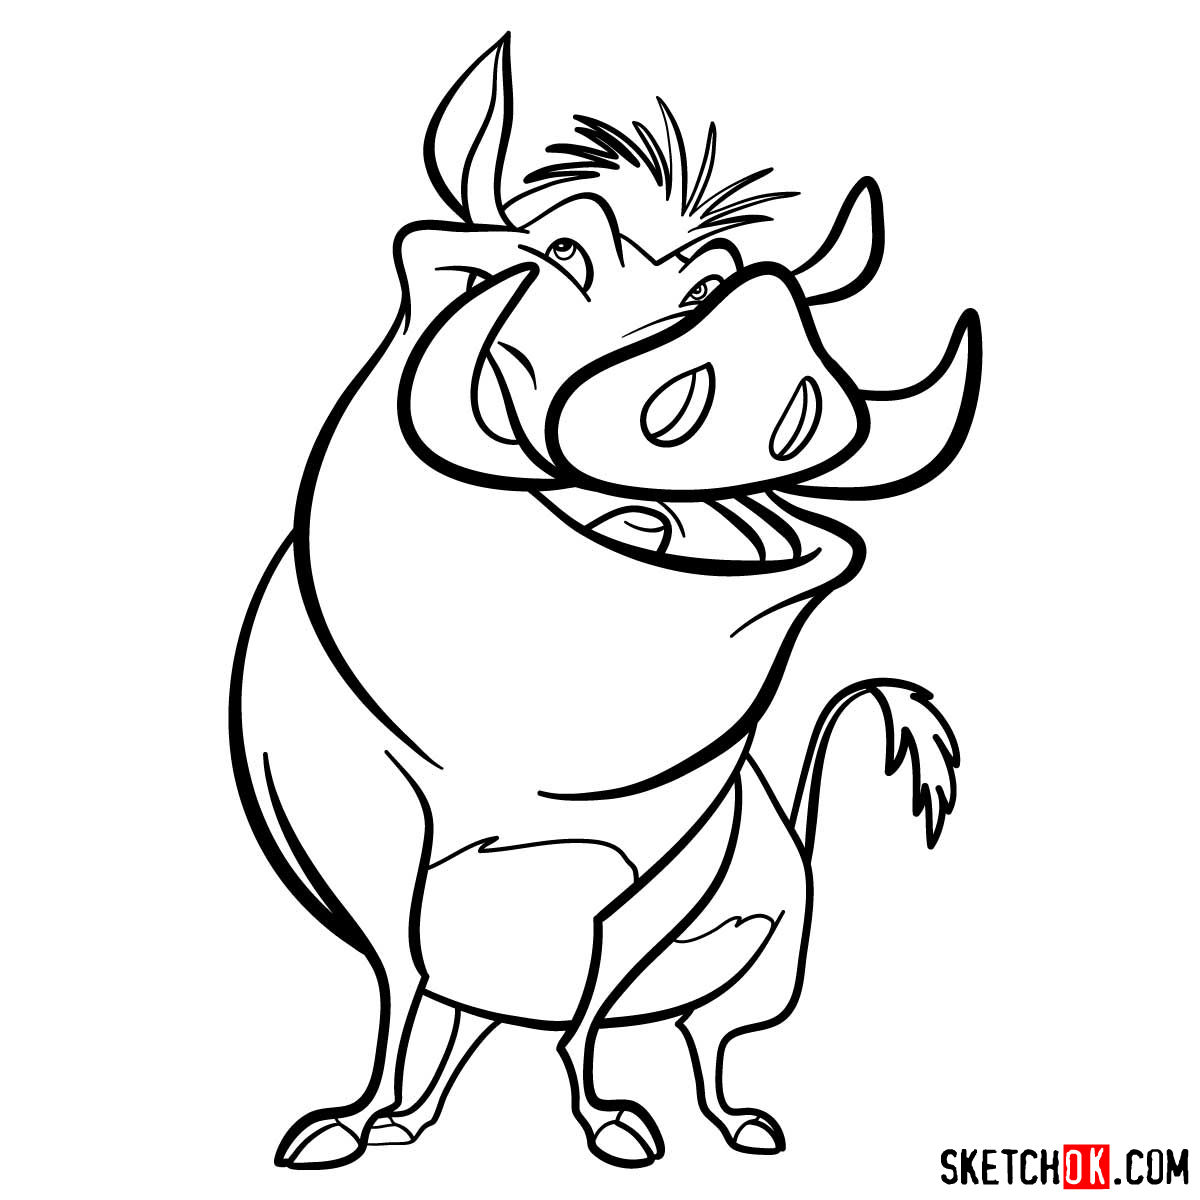 How to draw Pumba | Lion King